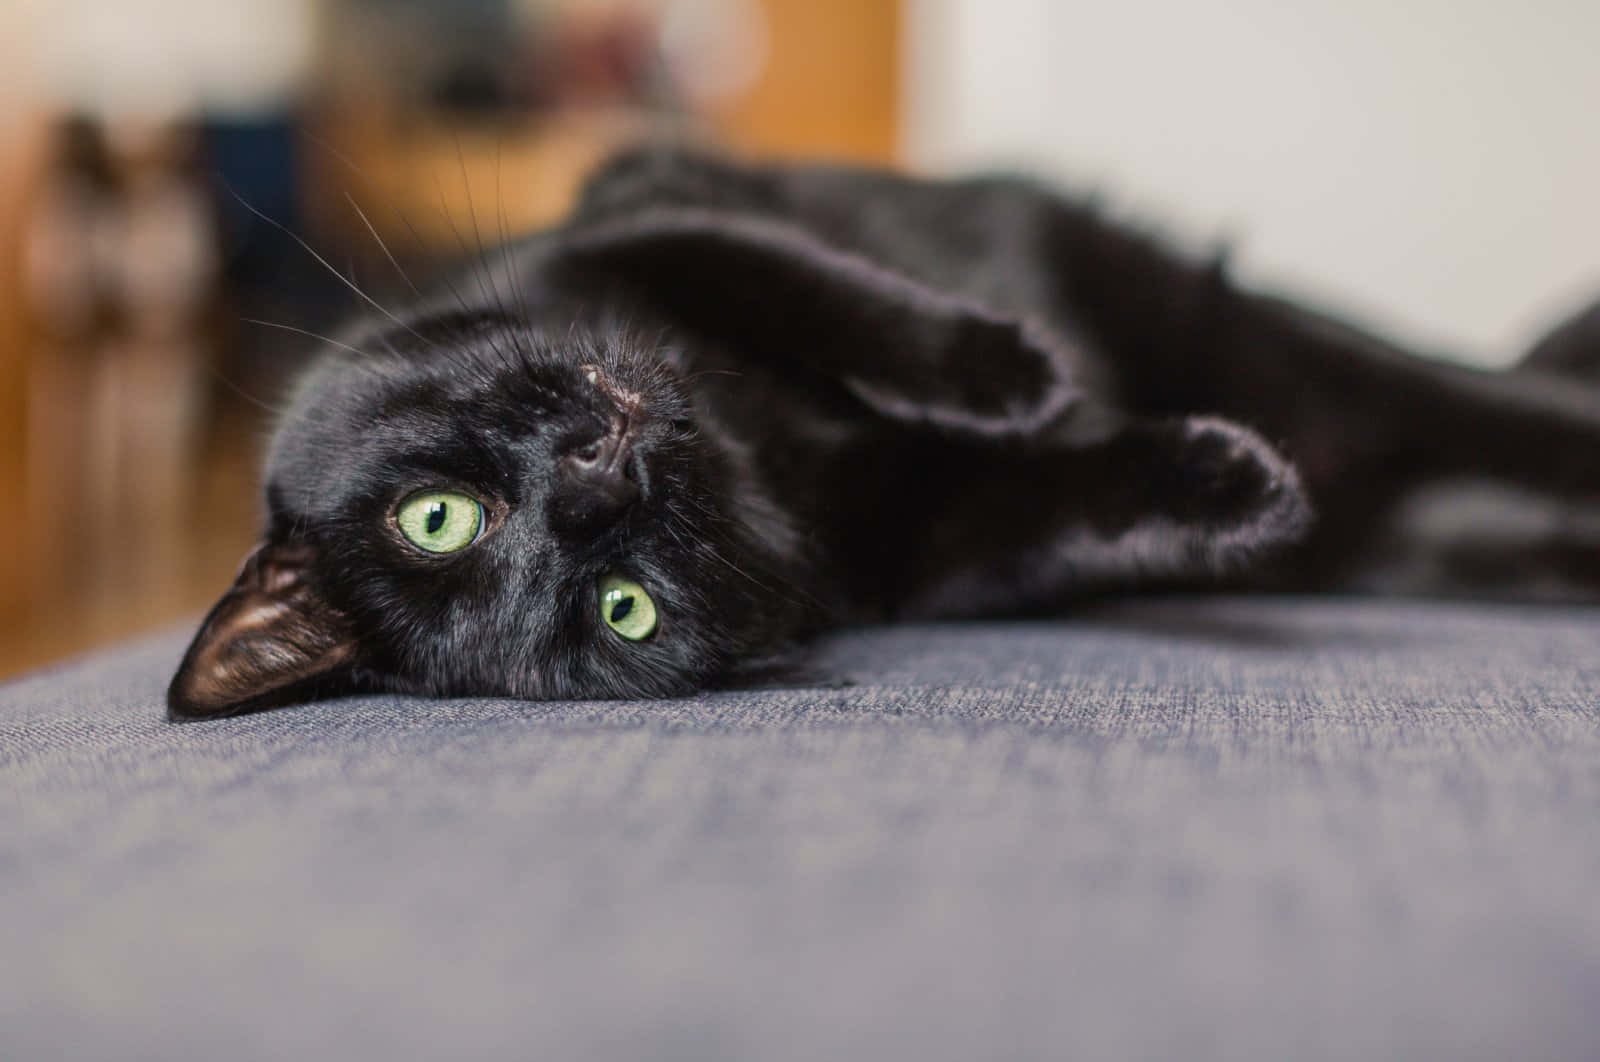 An inquisitive black cat stares into the camera